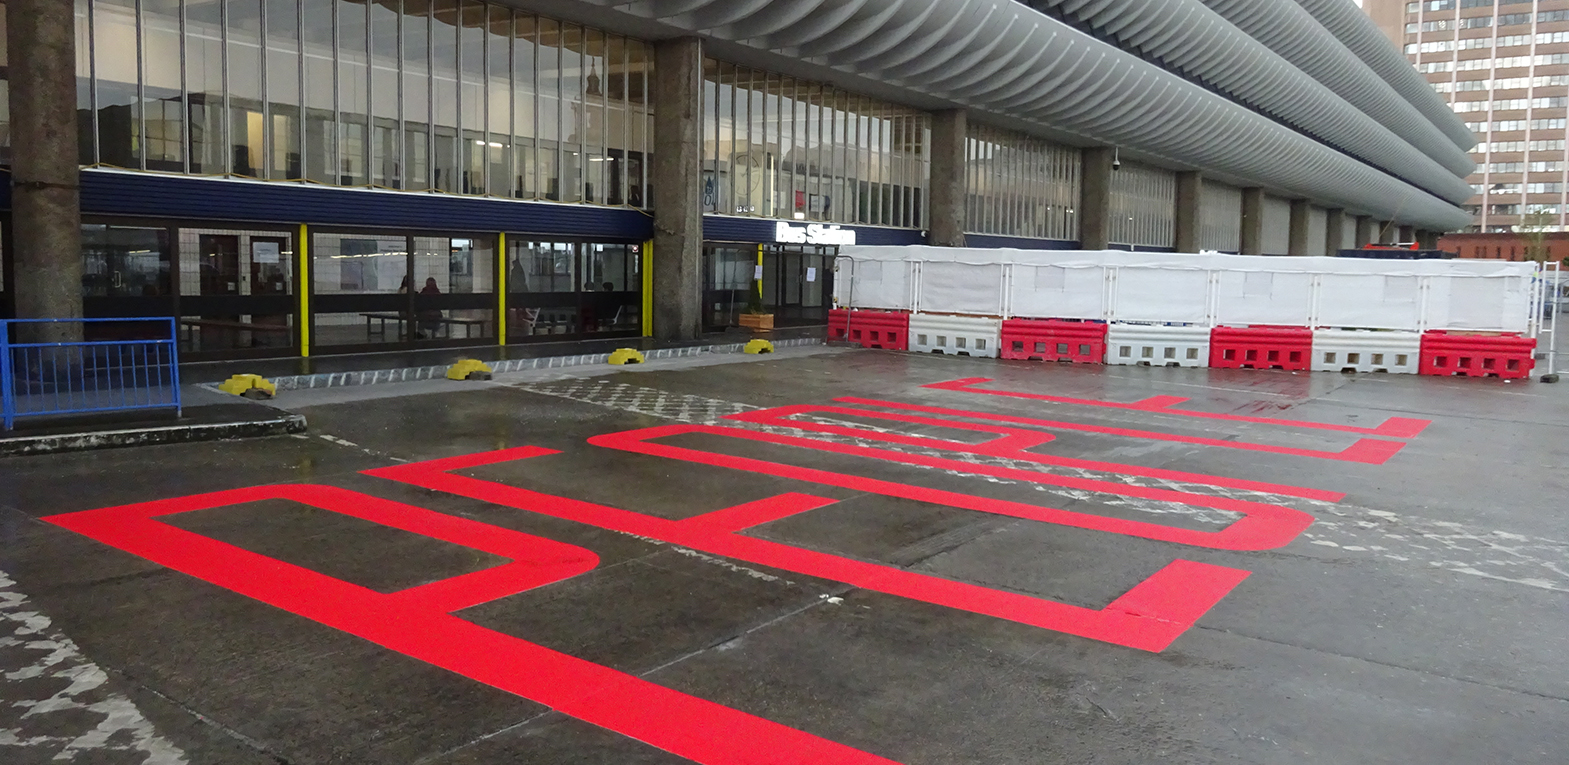 'People' artwork by LOW PROFILE. The word people is painted in road marking paint on the forecourt of Preston Bus Station.